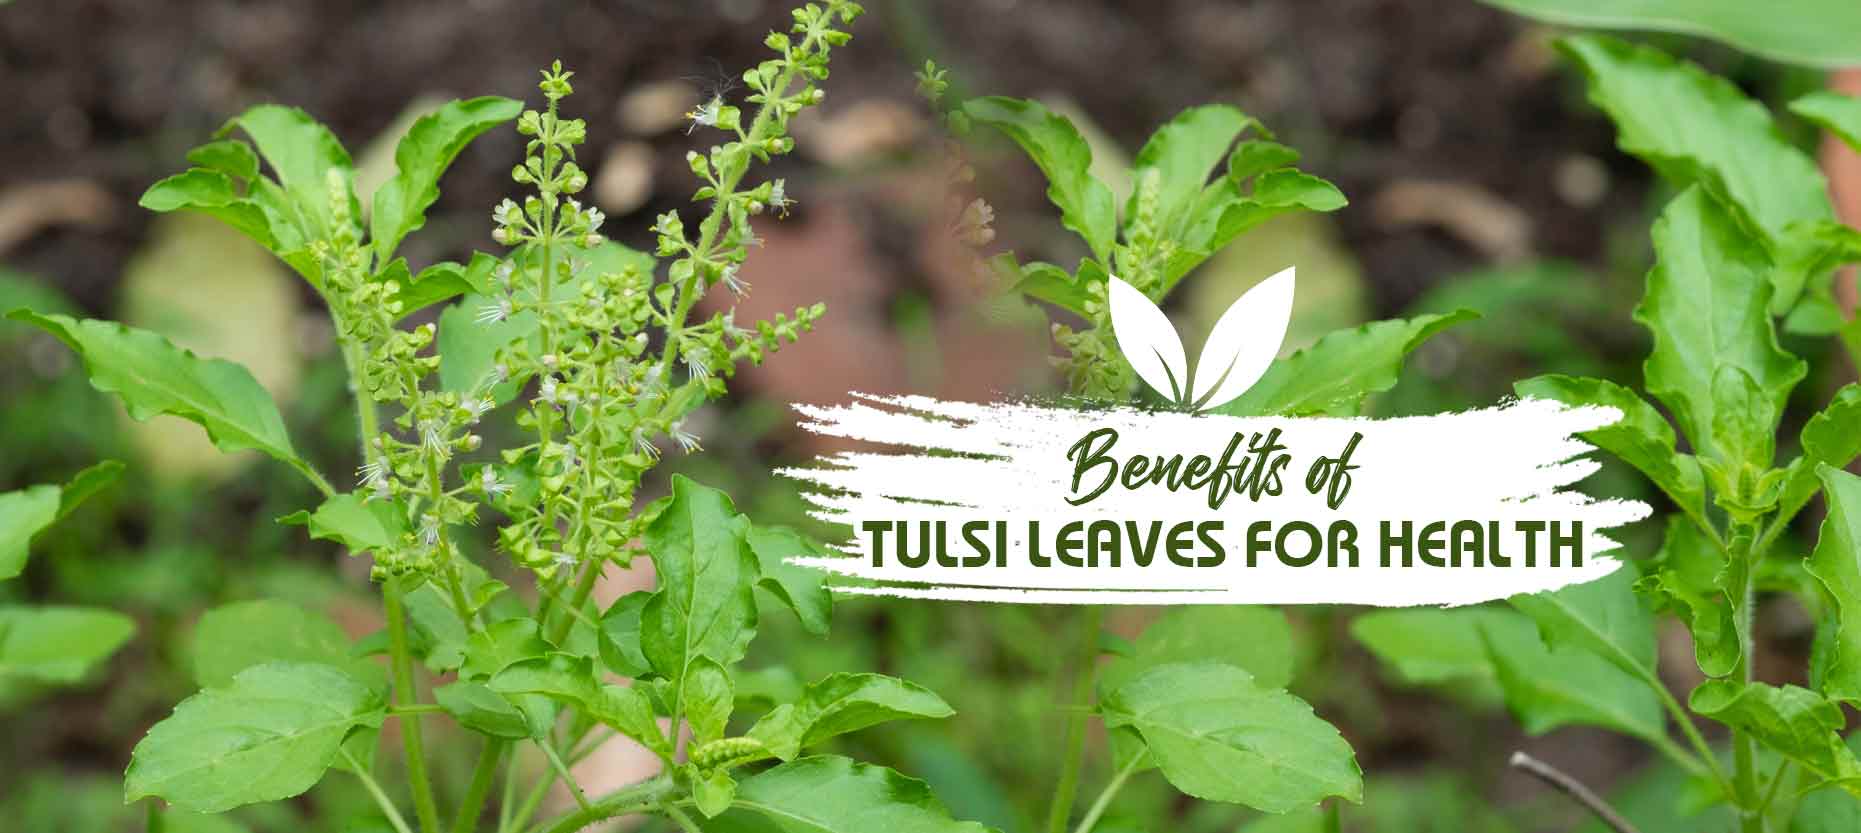 Benefits of Tulsi Leaves for Health